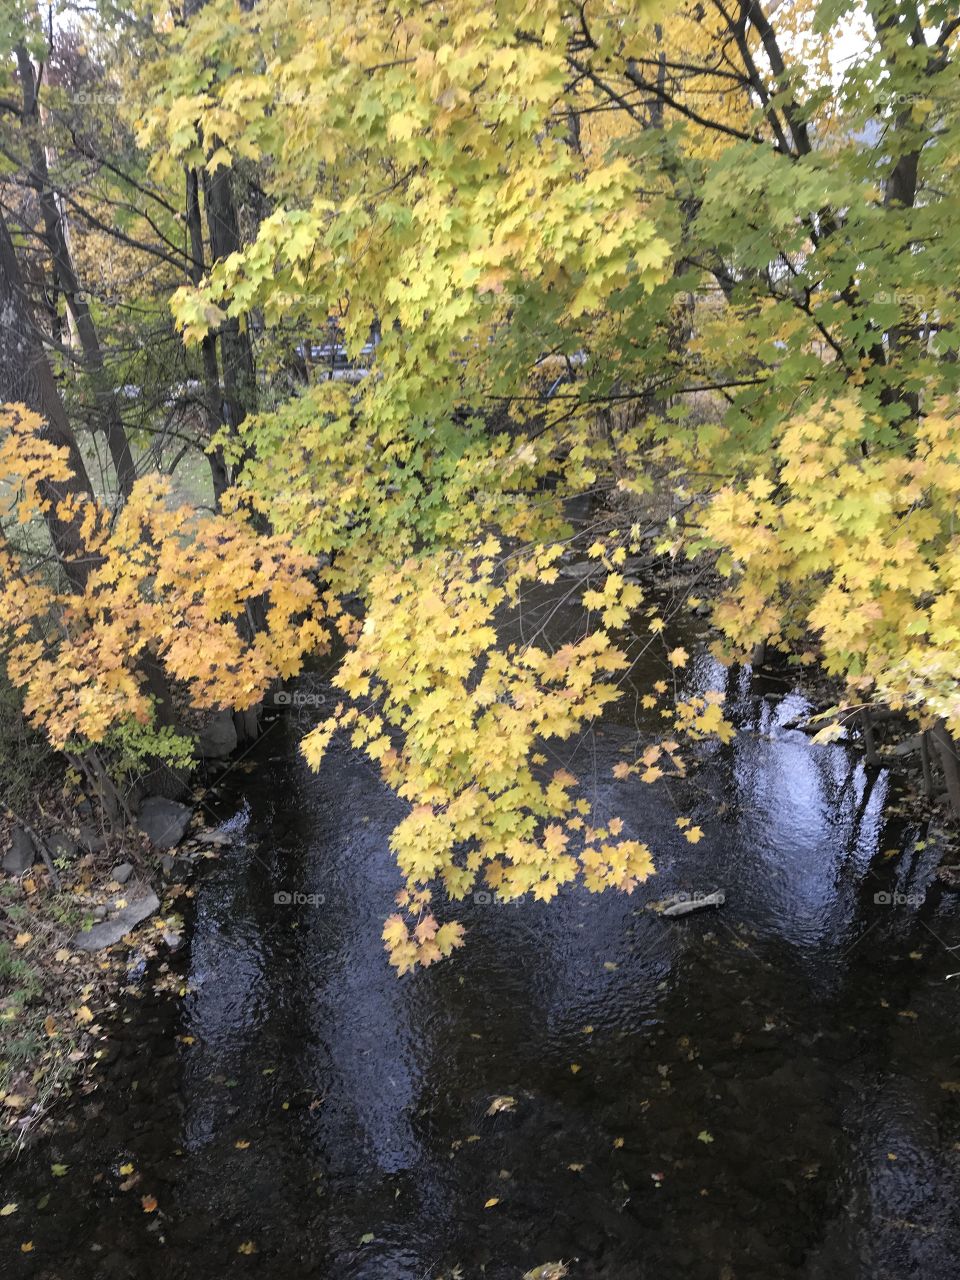 Fall has arrived! Beautiful leaves and a stream in town